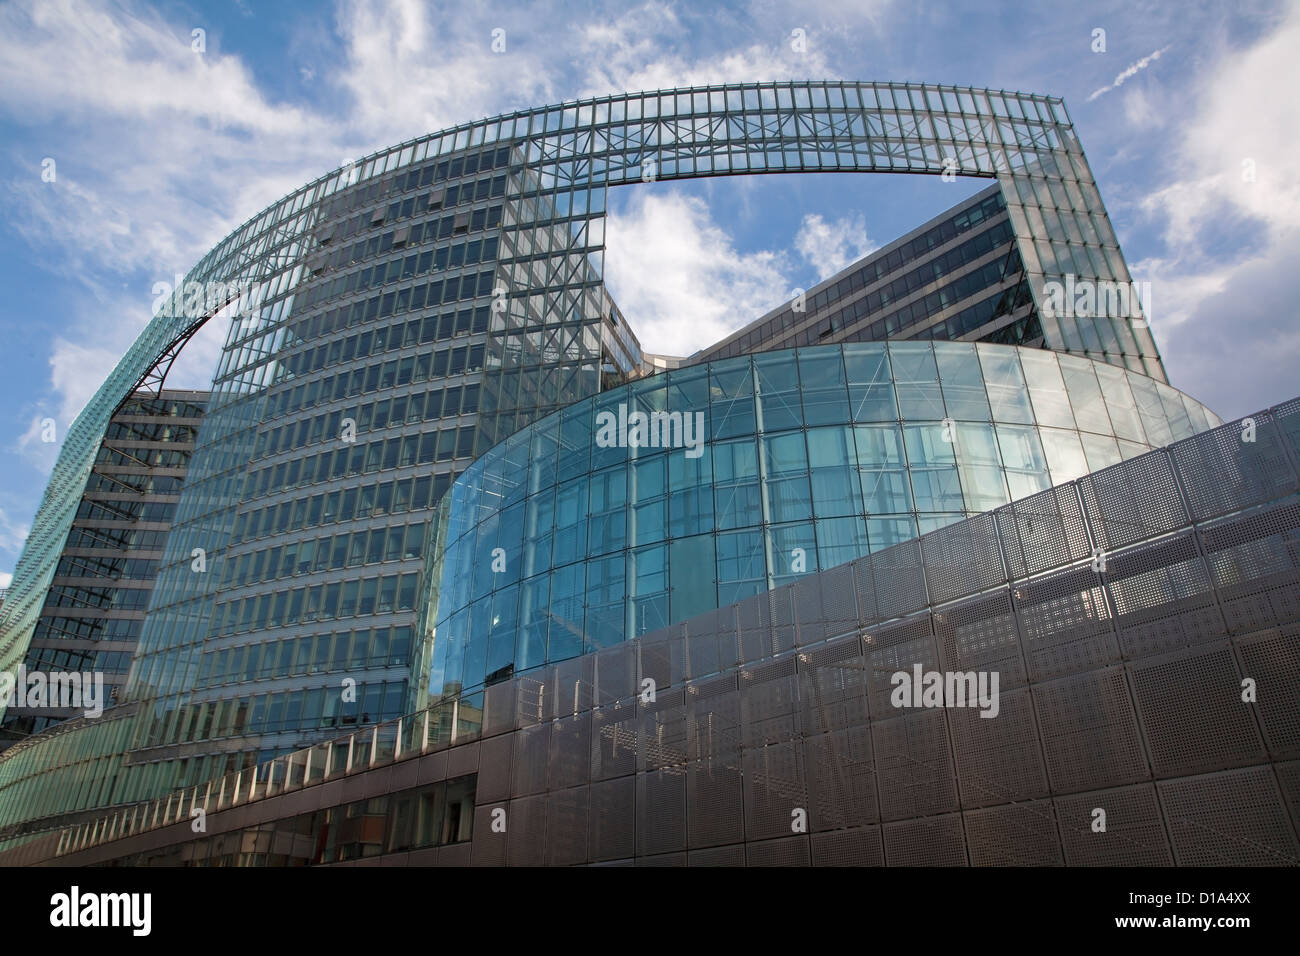 BRUSSELS - JUNE 24: European commission building at Schumann square on June 24, 2012 in Brussels. Stock Photo